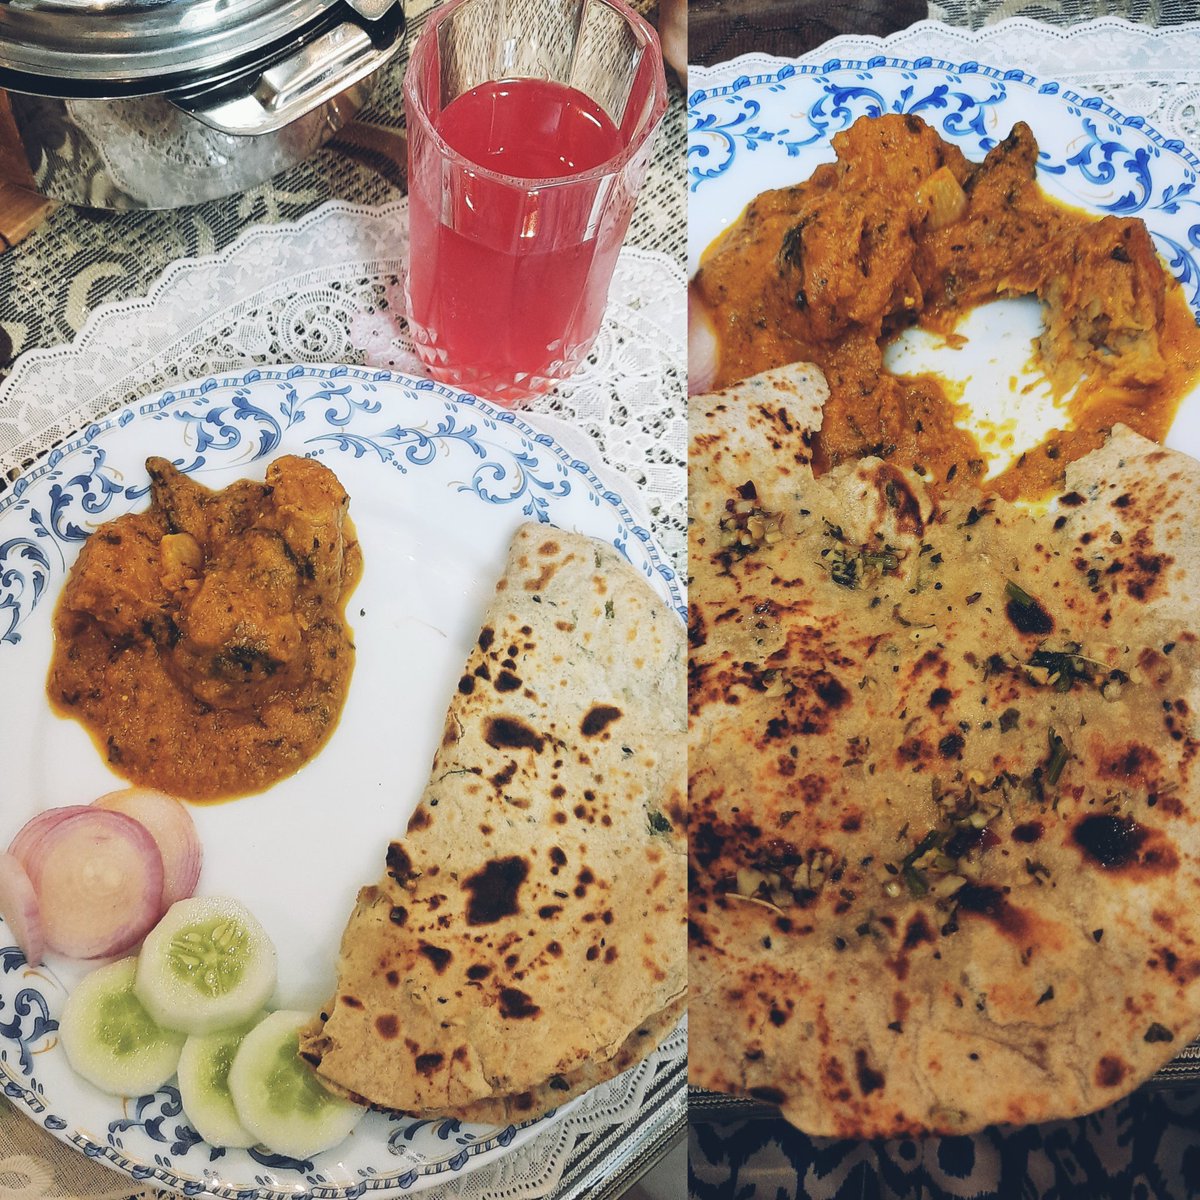 From Italy last night, I traveled back home and cooked this delicious Soya Chaap Masala curry and Maa made this super delicious tandoori garlic roti for a Sunday lunch feast! 🤤🤤😋
Accompaniments: rose Nimbu soda, cucumber and onion soaked in vinegar 😍
#lunch #soyachaap